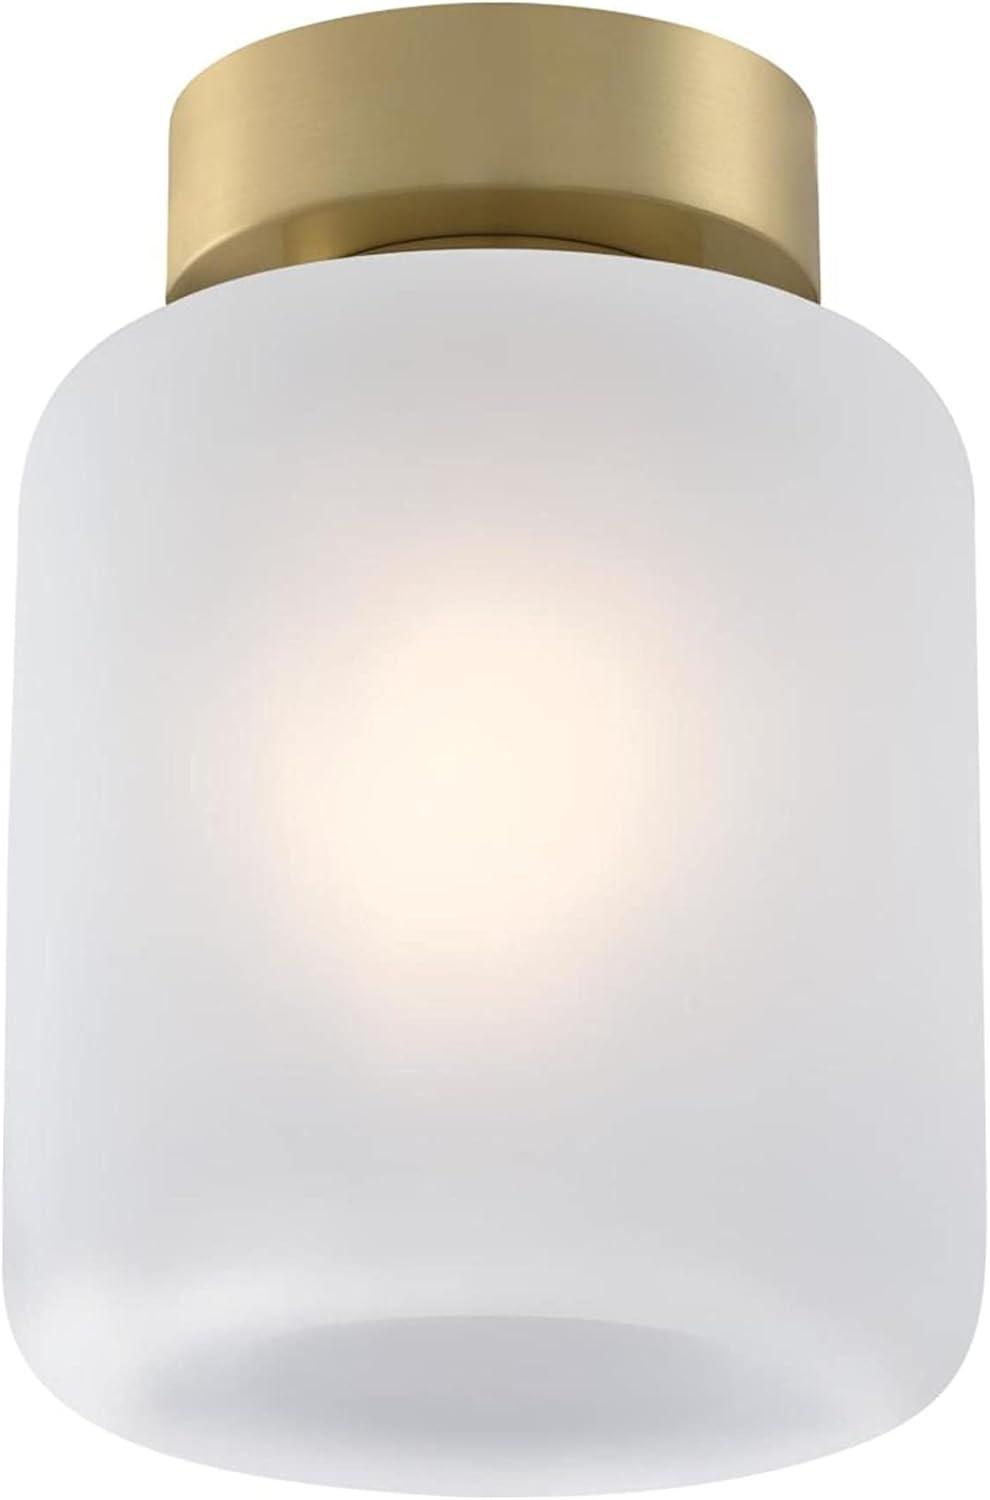 Champagne Brass 8'' Frosted Glass Semi-Flush Mount Ceiling Light